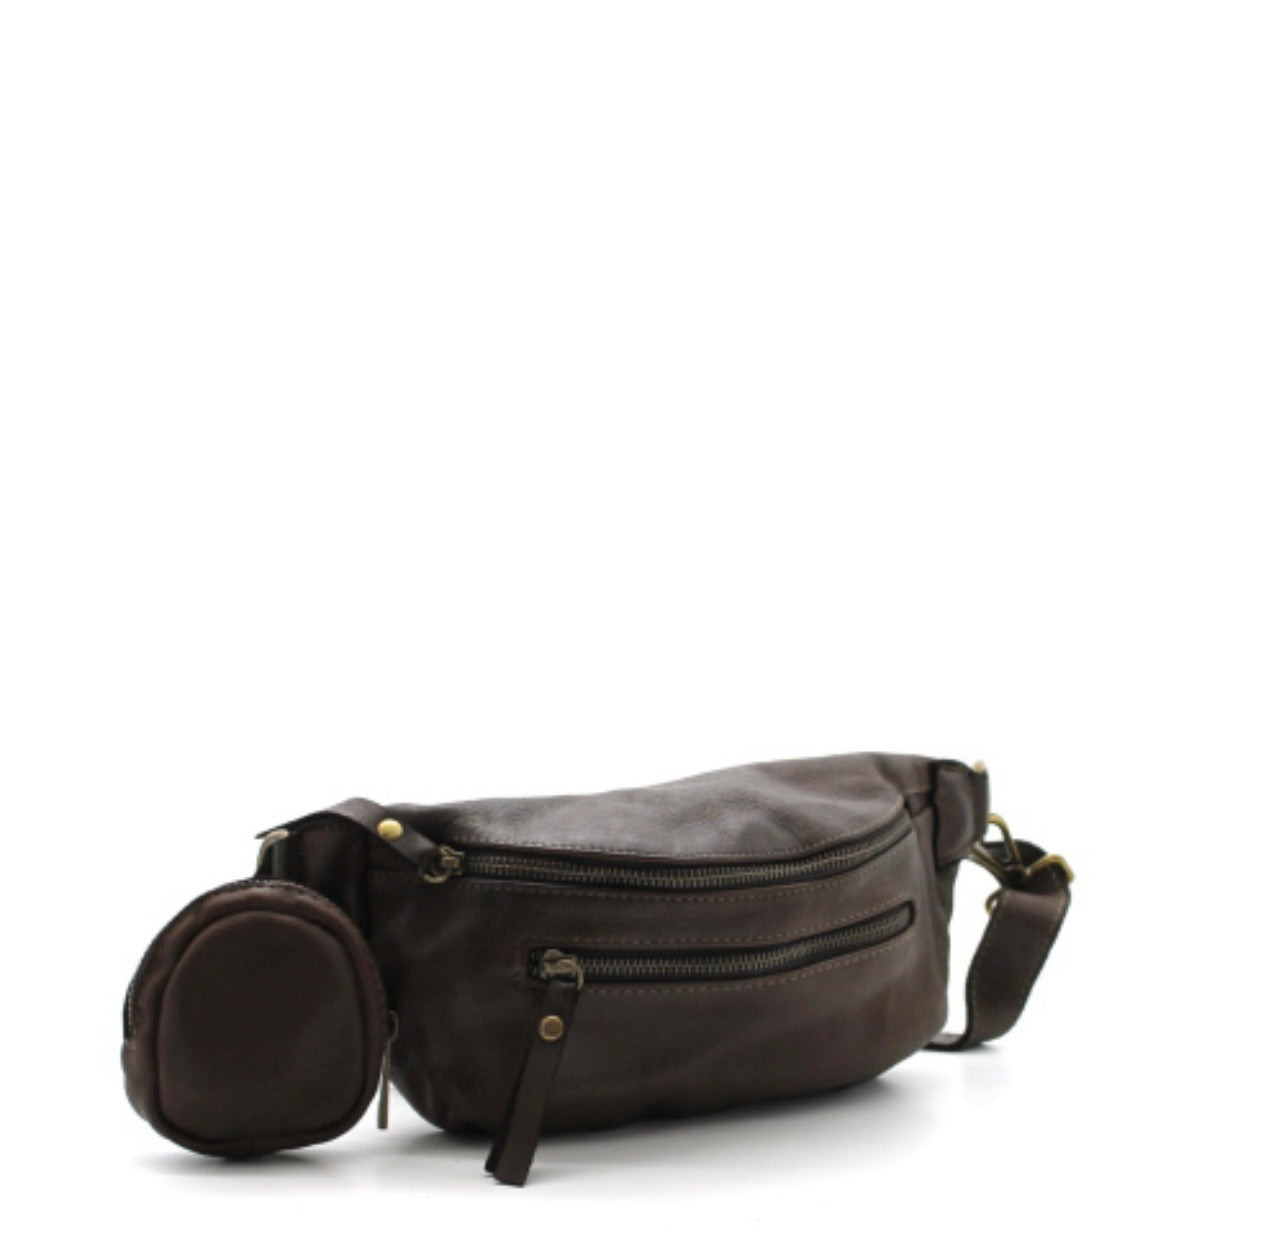 DIFFUSION.ie Vimoda Small Bum Bag with Coin Purse in Chocolate